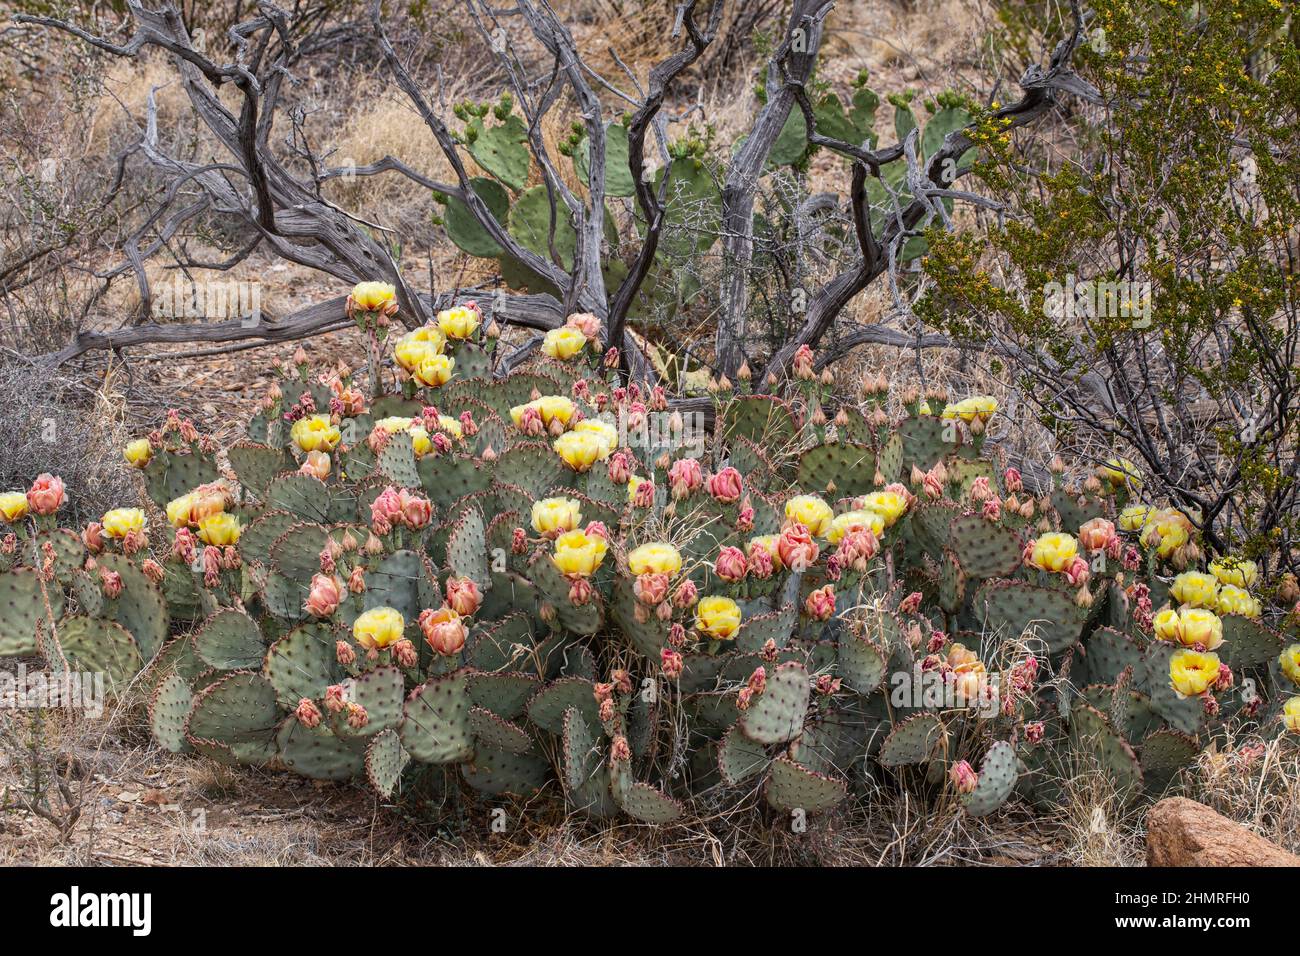 Yellow and red flowers cover a low-growing purple prickly pear. Stock Photo